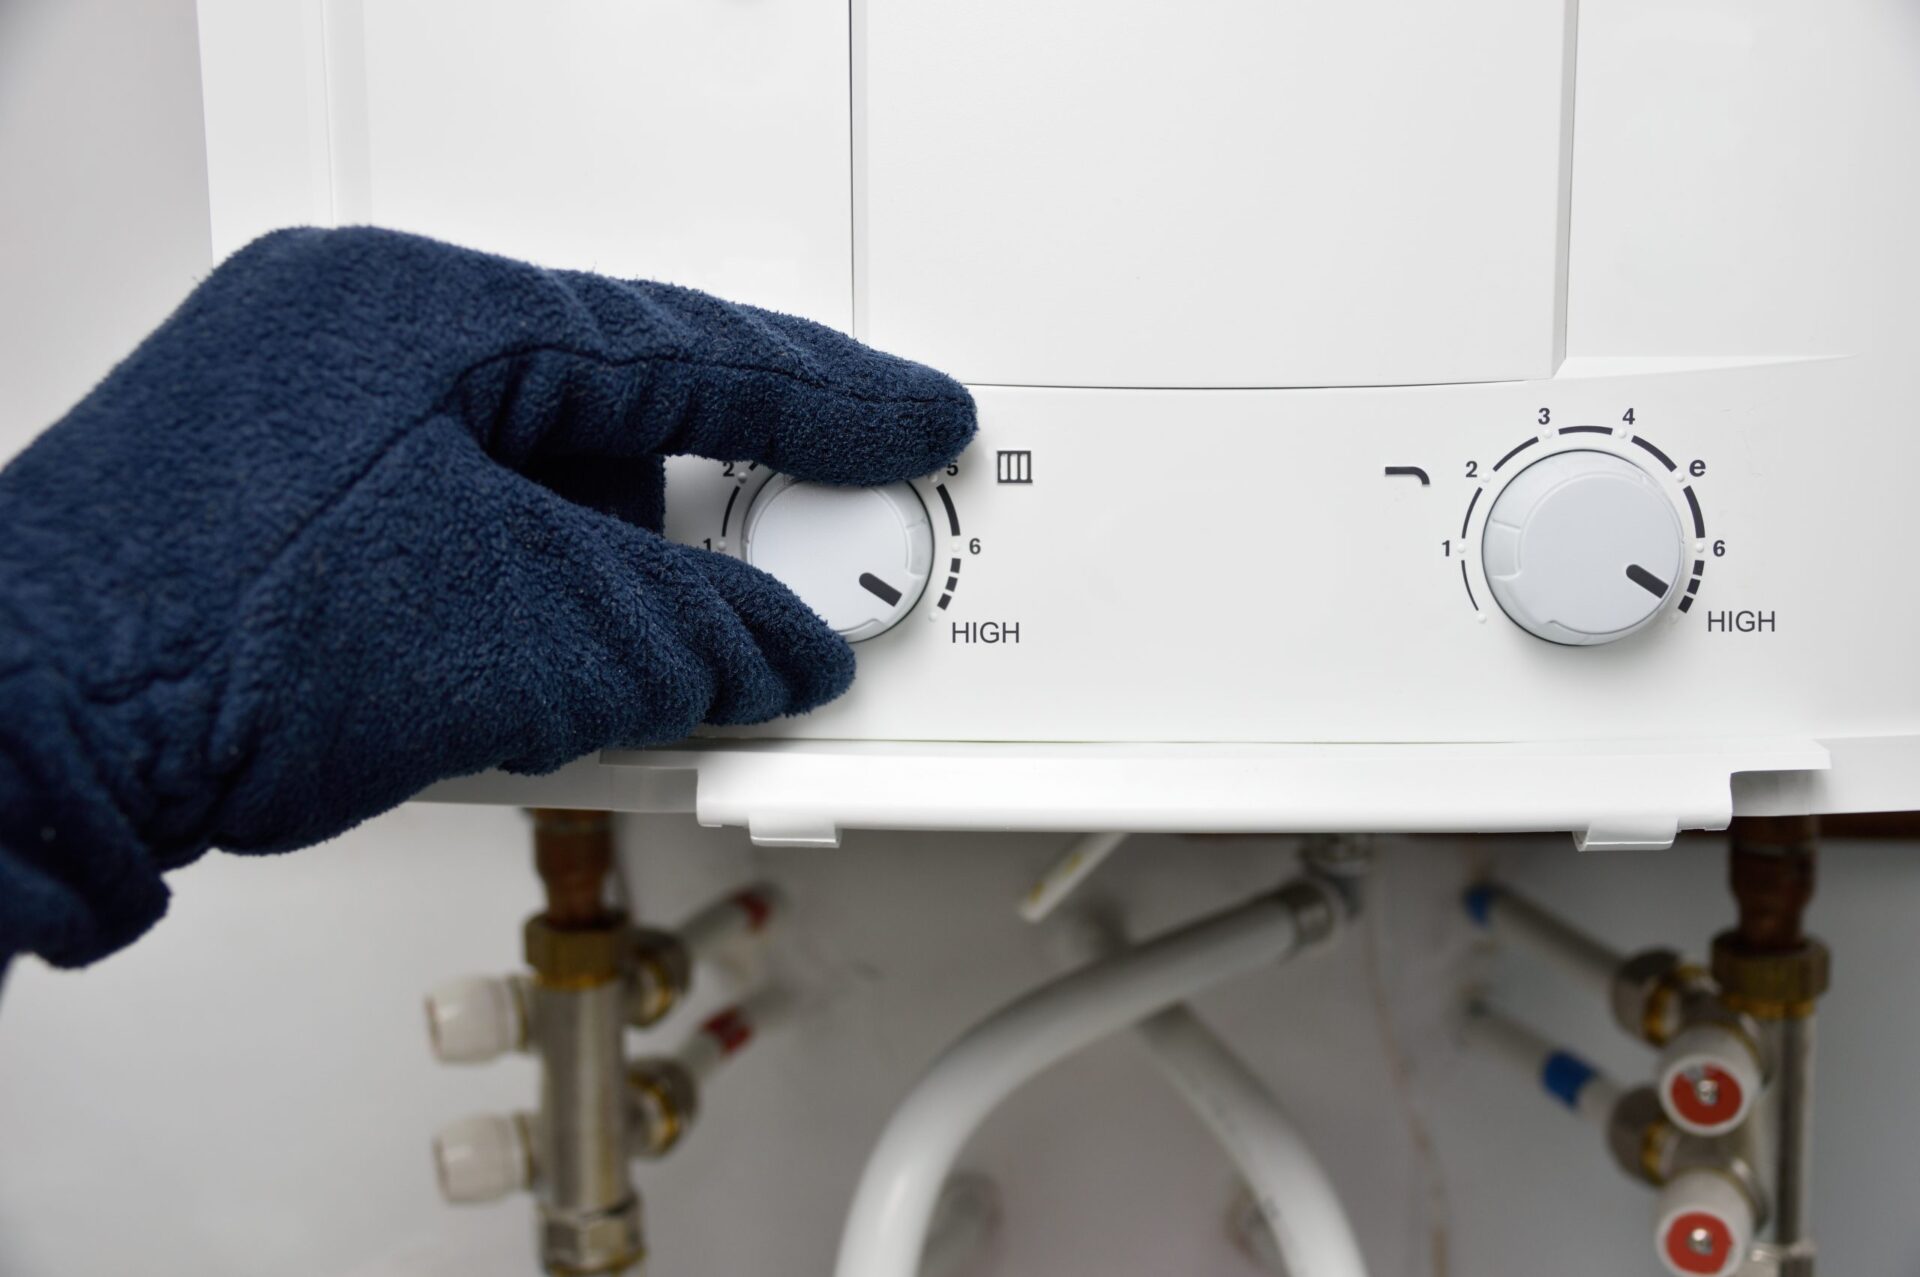 Hand with gloves on adjusting the temperature on a tankless water heater 